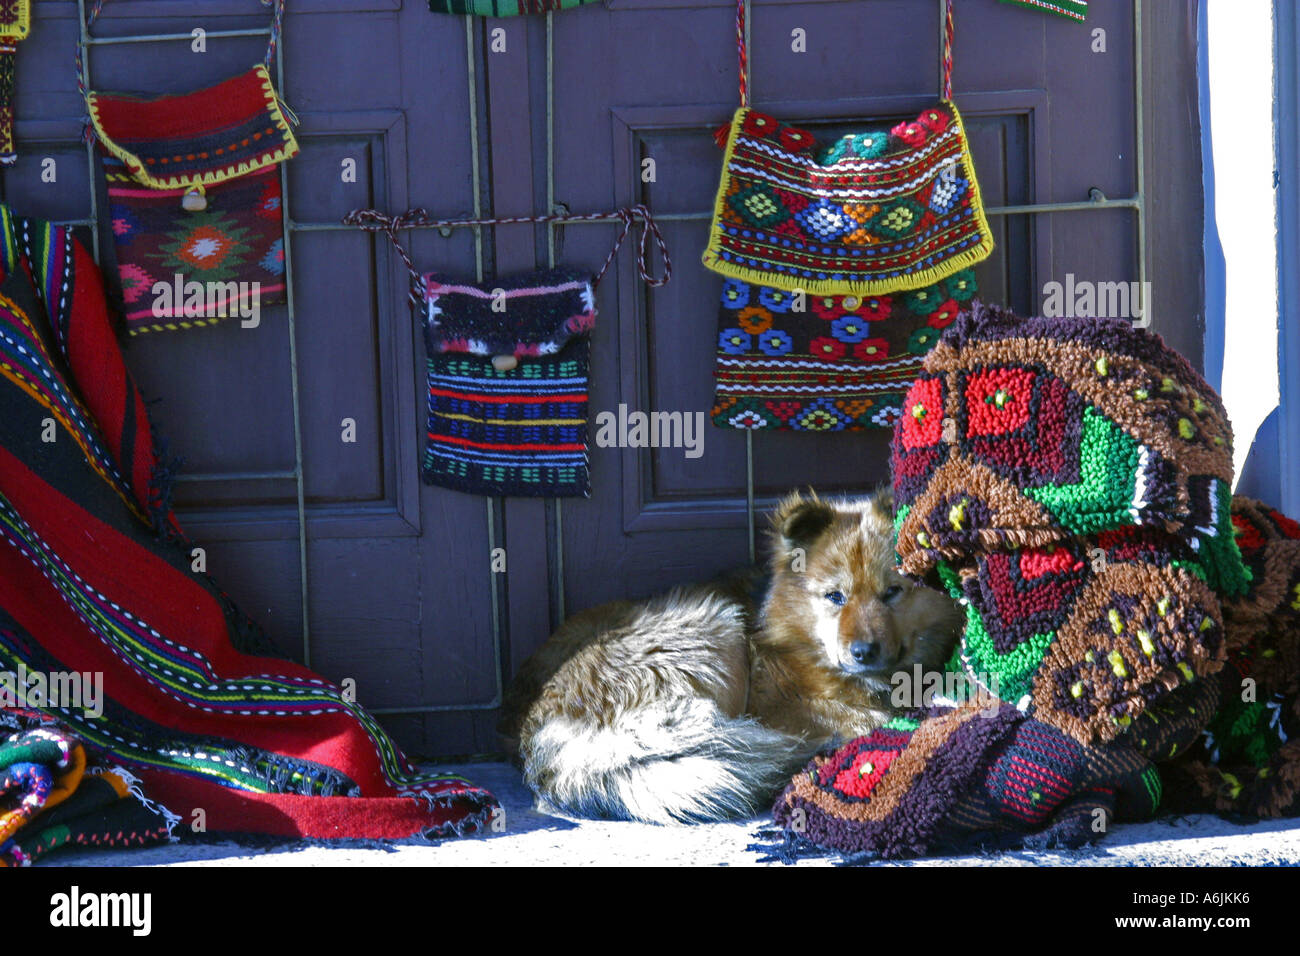 Dog lying amongst the display of typical bulgarian carpets bags and cloths at a street market in Bansko Bulgaria Stock Photo